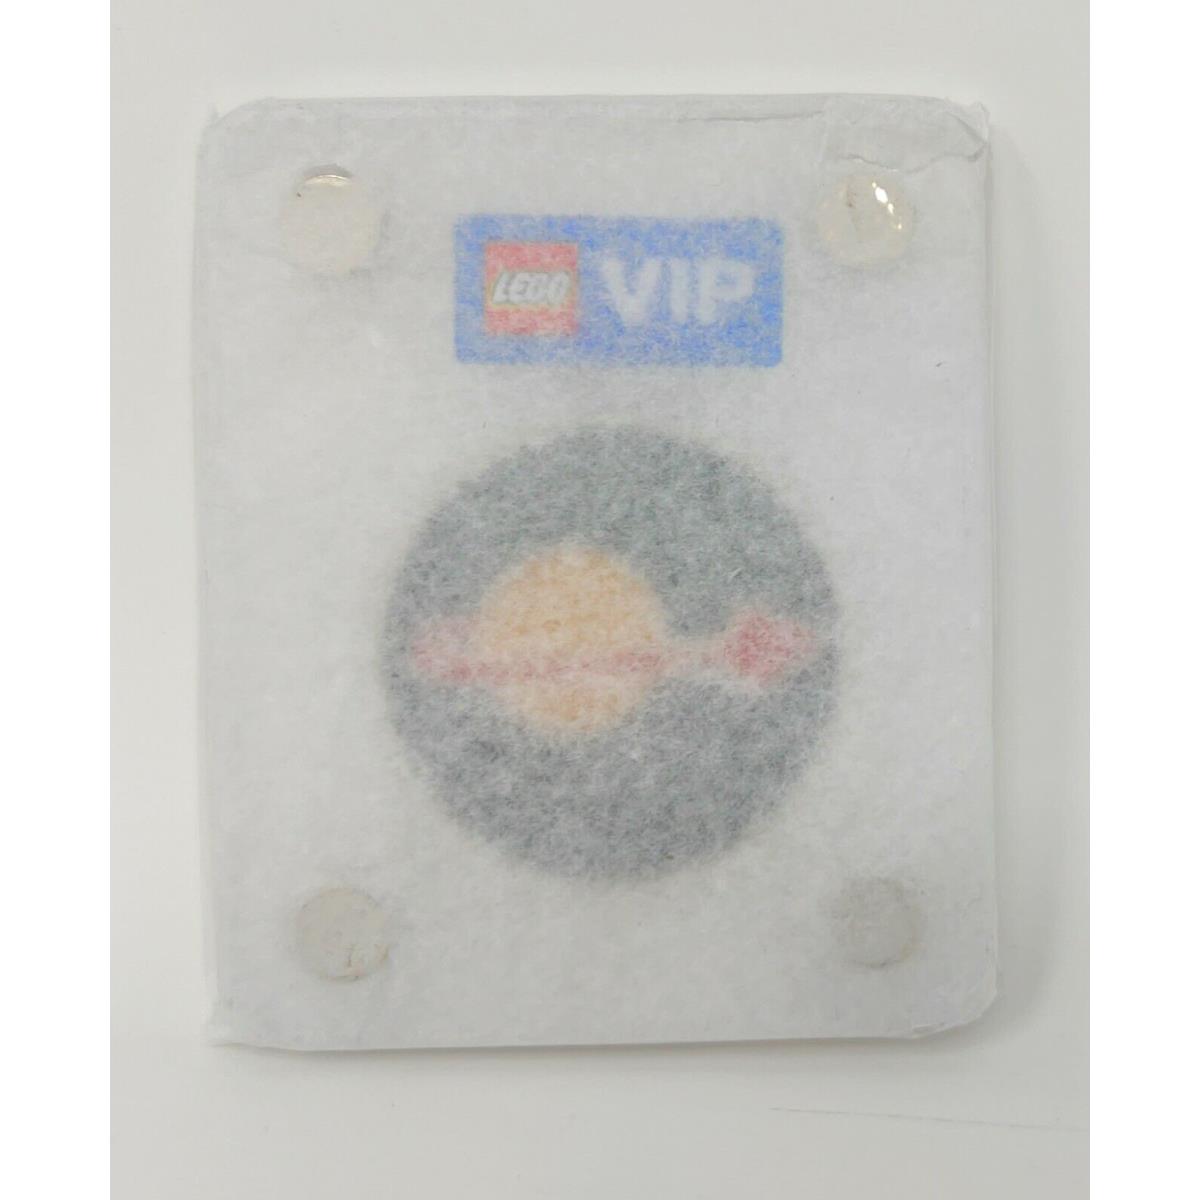 Lego Vip Space Logo Collectible Coin 2021 in Tissue Paper